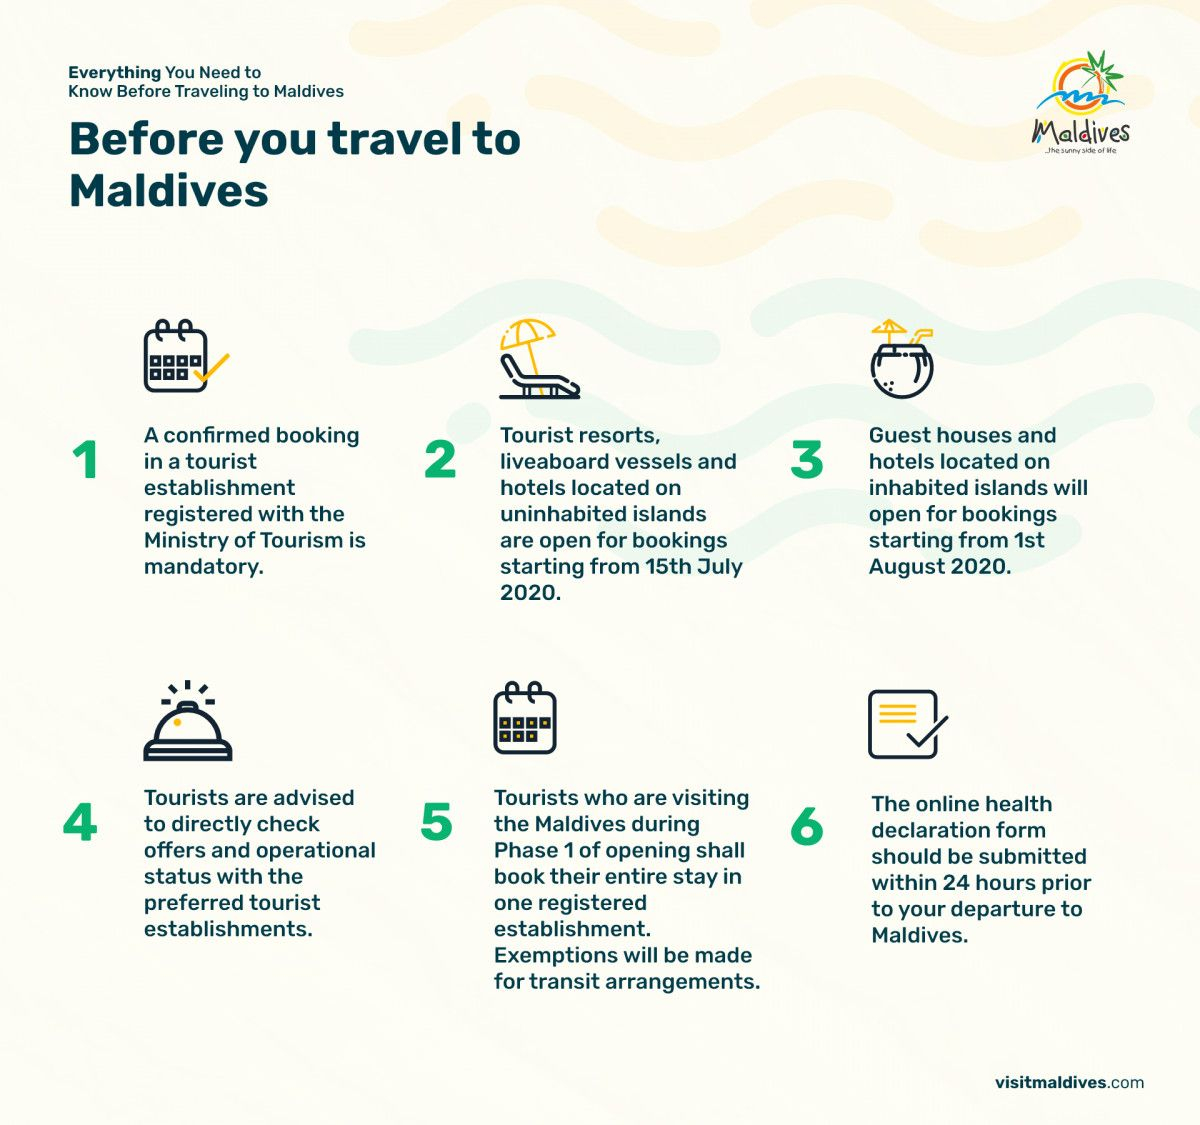 EVERYTHING YOU NEED TO KNOW BEFORE TRAVELING TO MALDIVES 